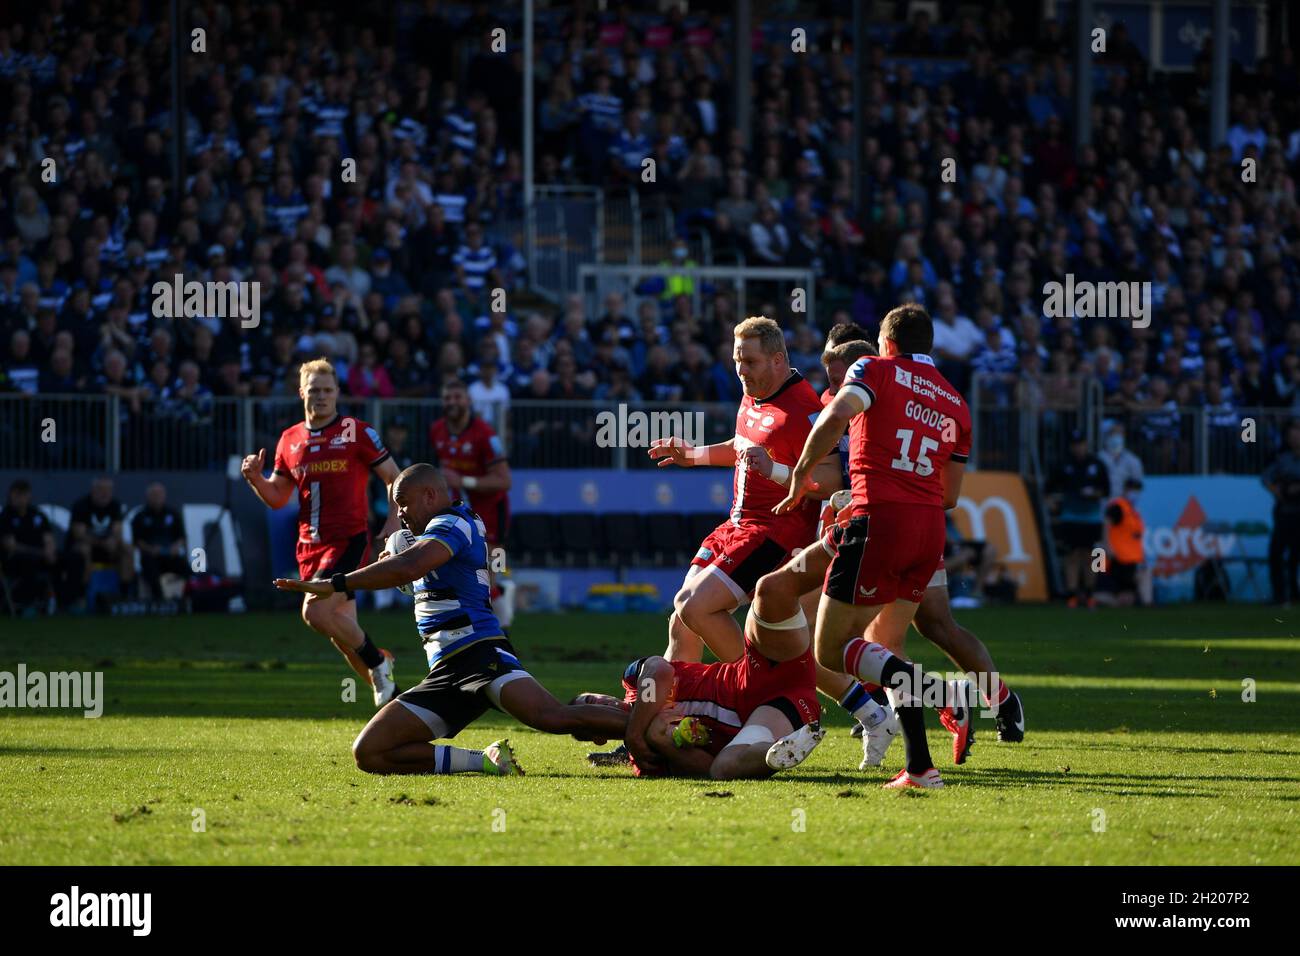 The Recreation Ground, Bath, England, UK. 17th October, 2021. Bath Rugby's Jonathan Joseph is tackled by Saracens' Ben Earl during the Gallagher English Premiership match between Bath Rugby and Saracens: Credit: Ashley Western/Alamy Live News Stock Photo